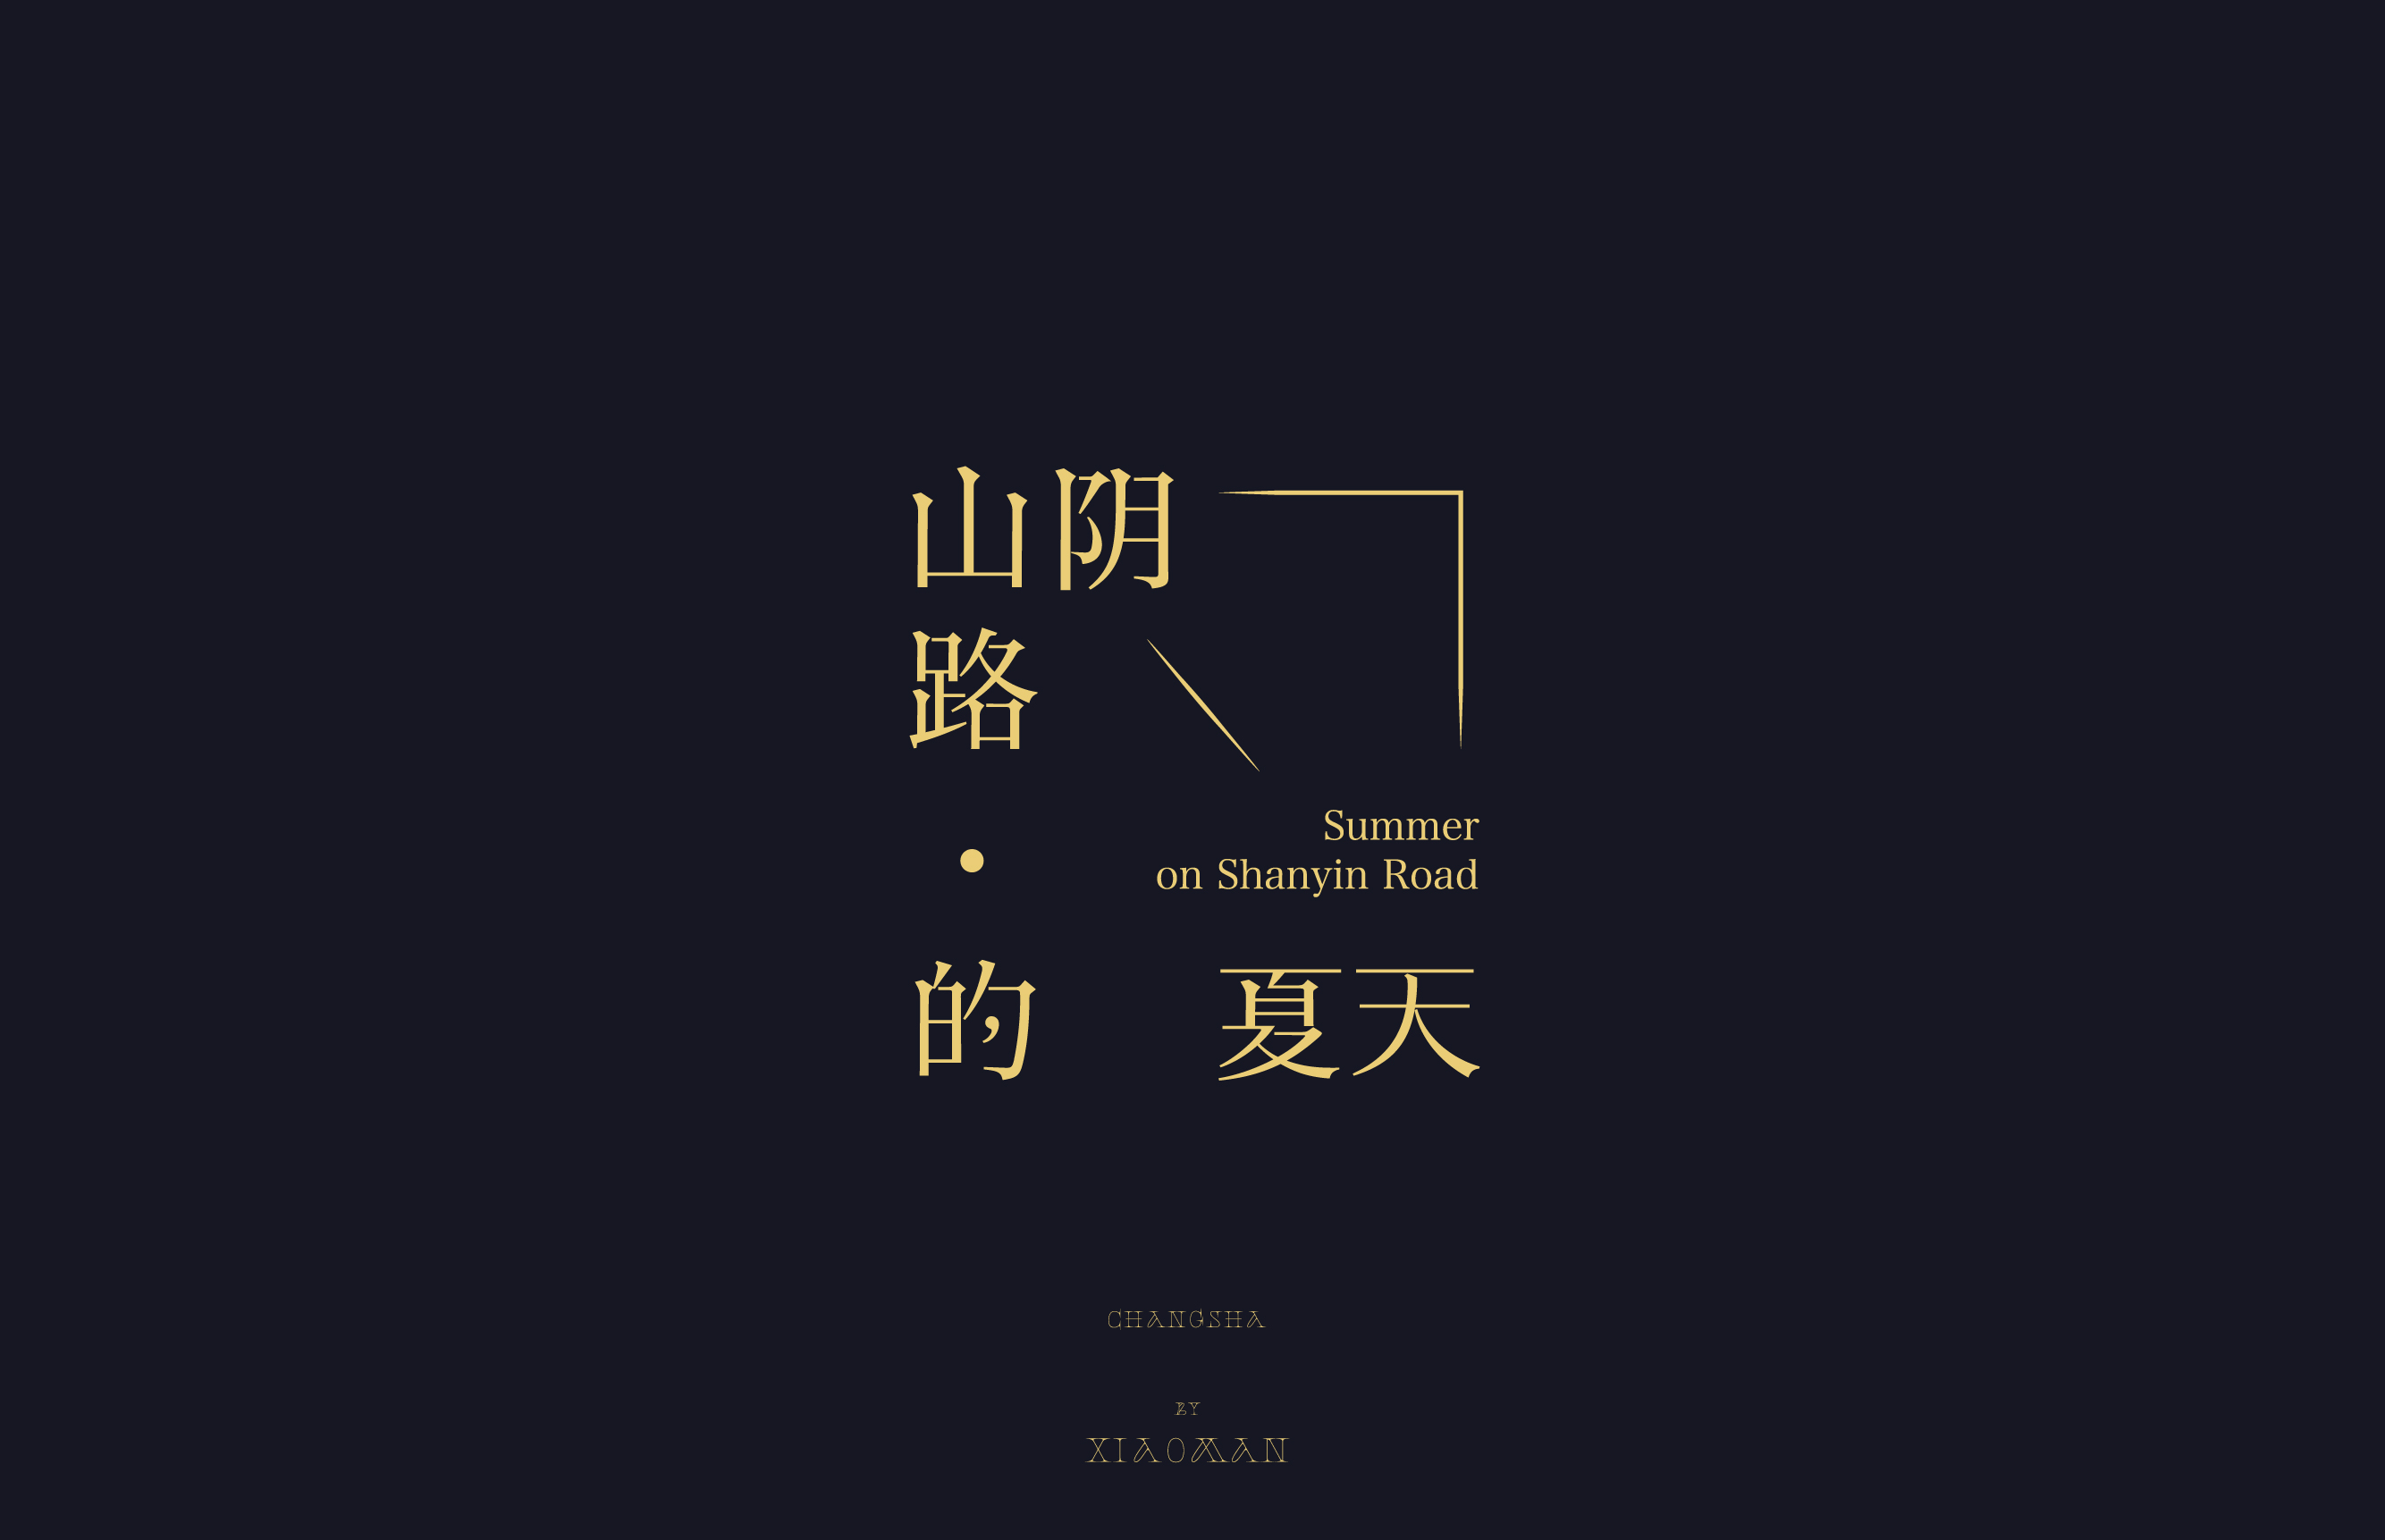 48P Collection of the latest Chinese font design schemes in 2021 #.247